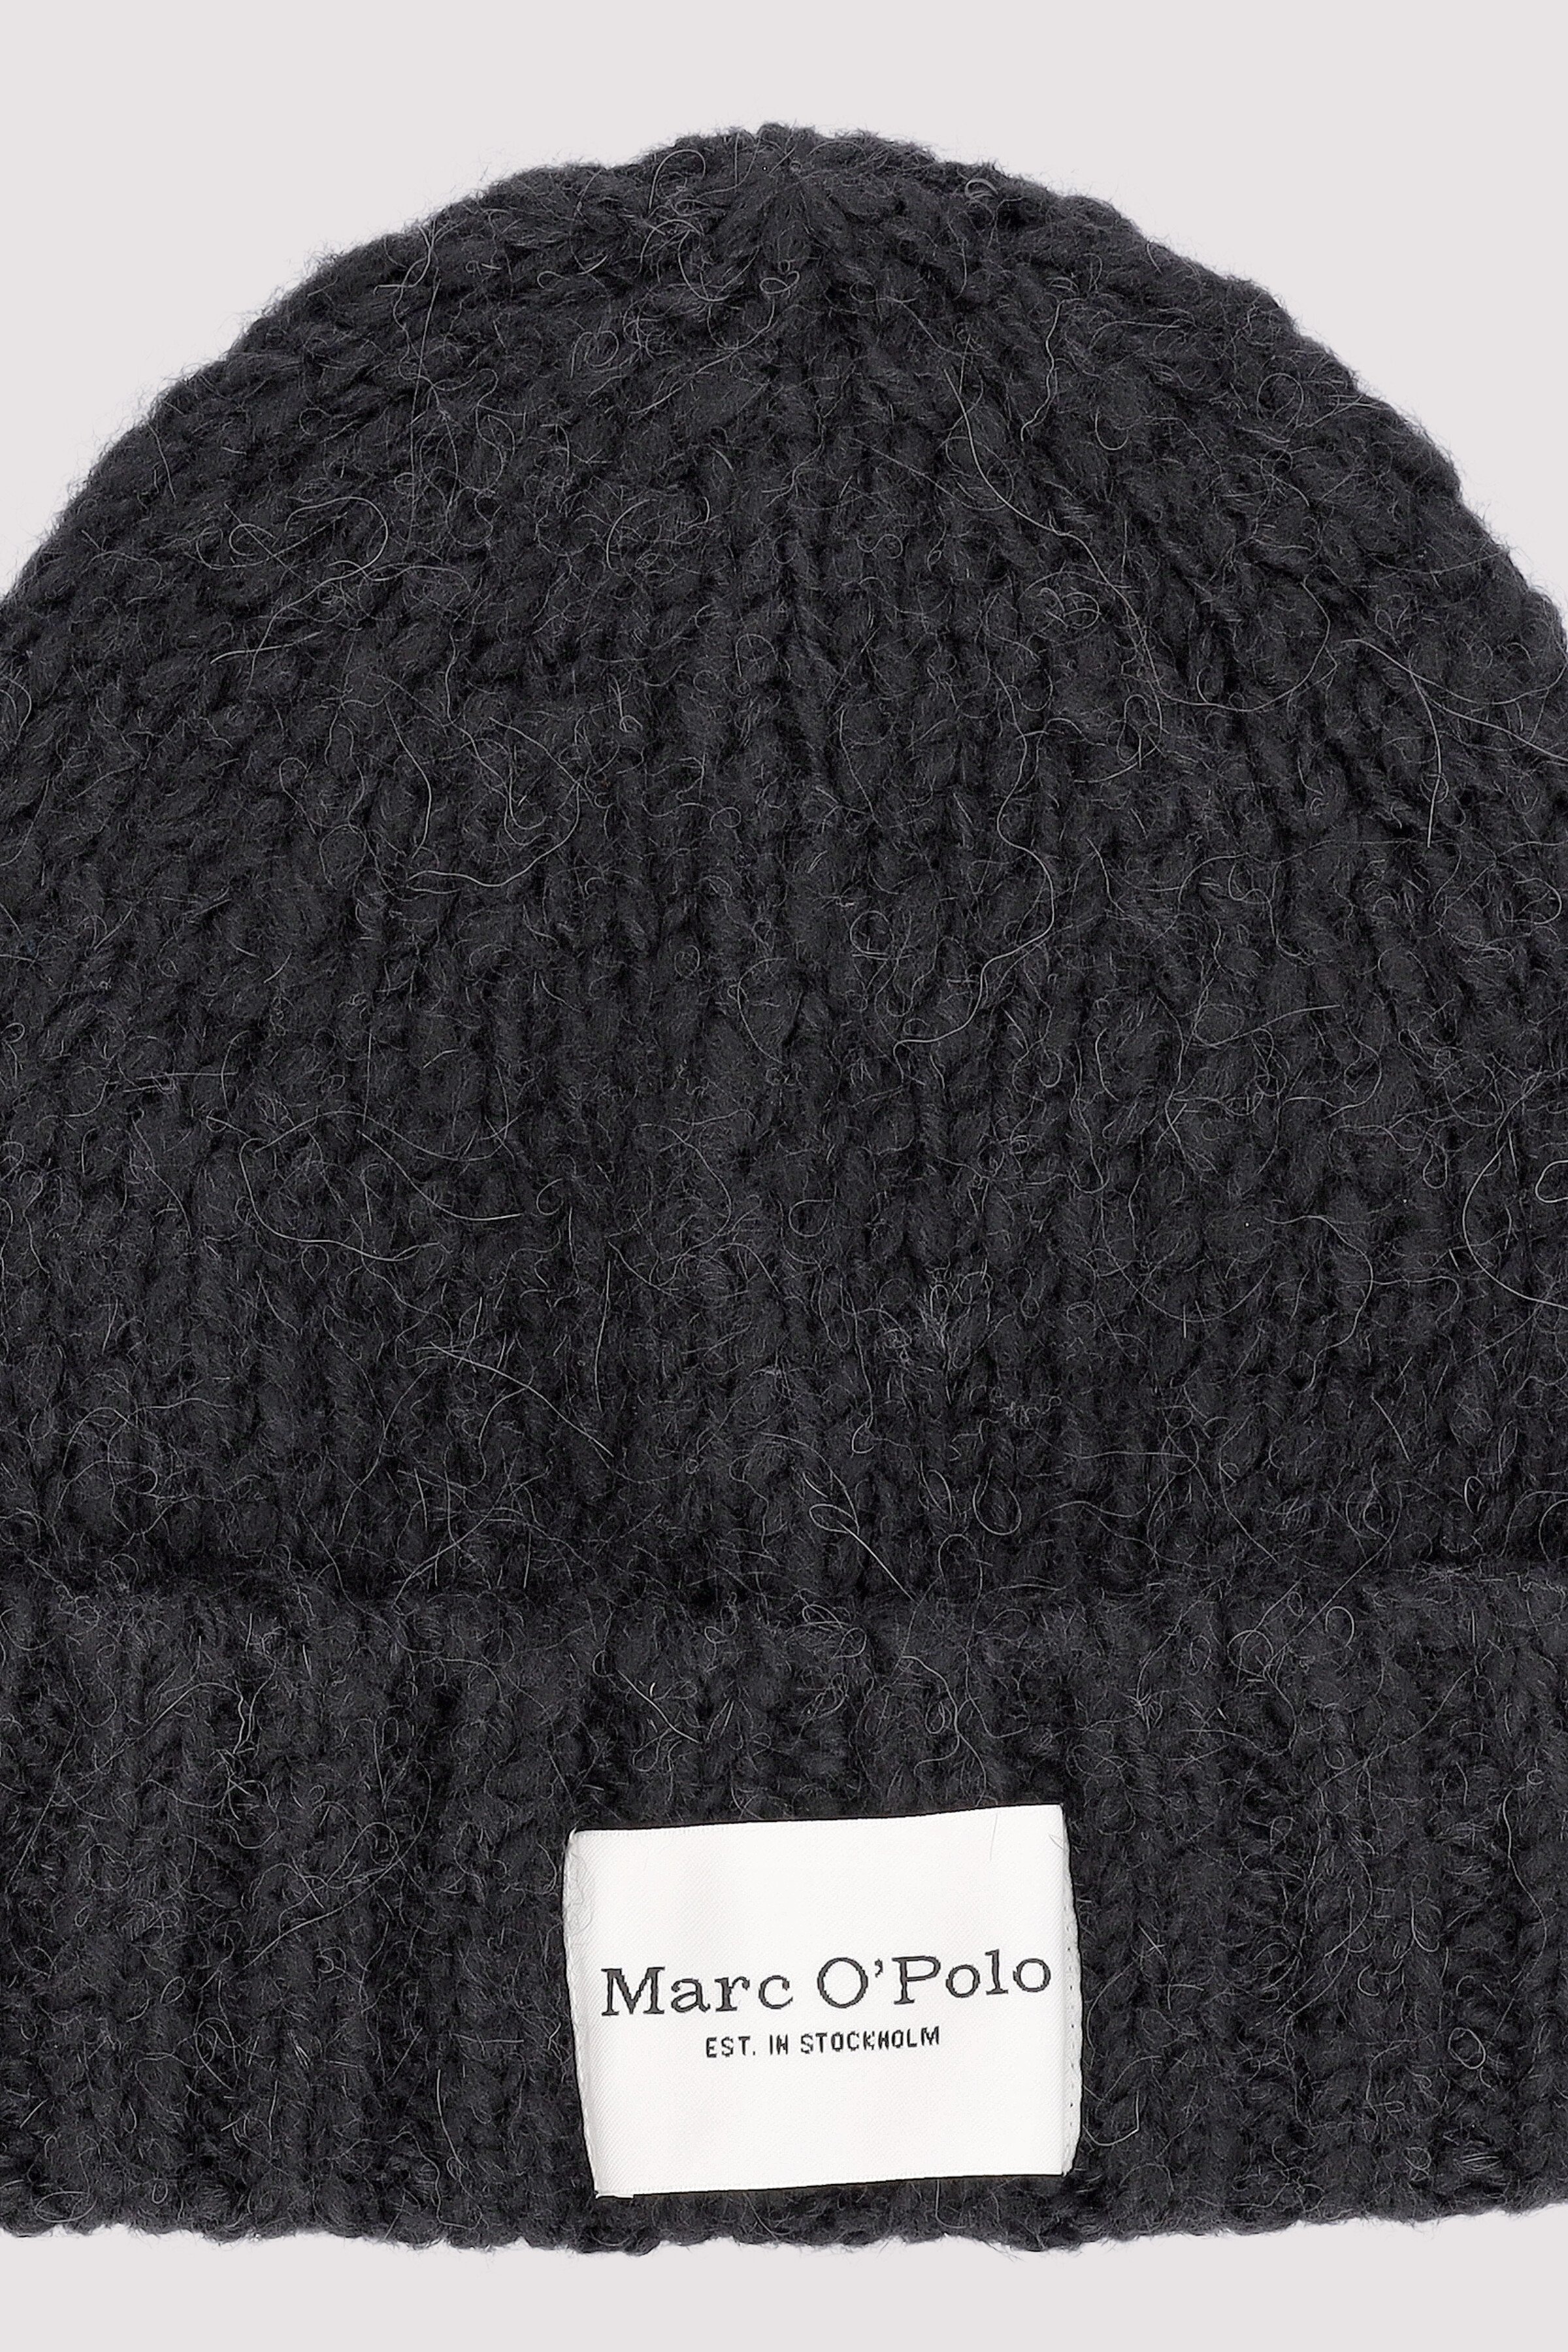 Hat, knitted, plain,  fold up,